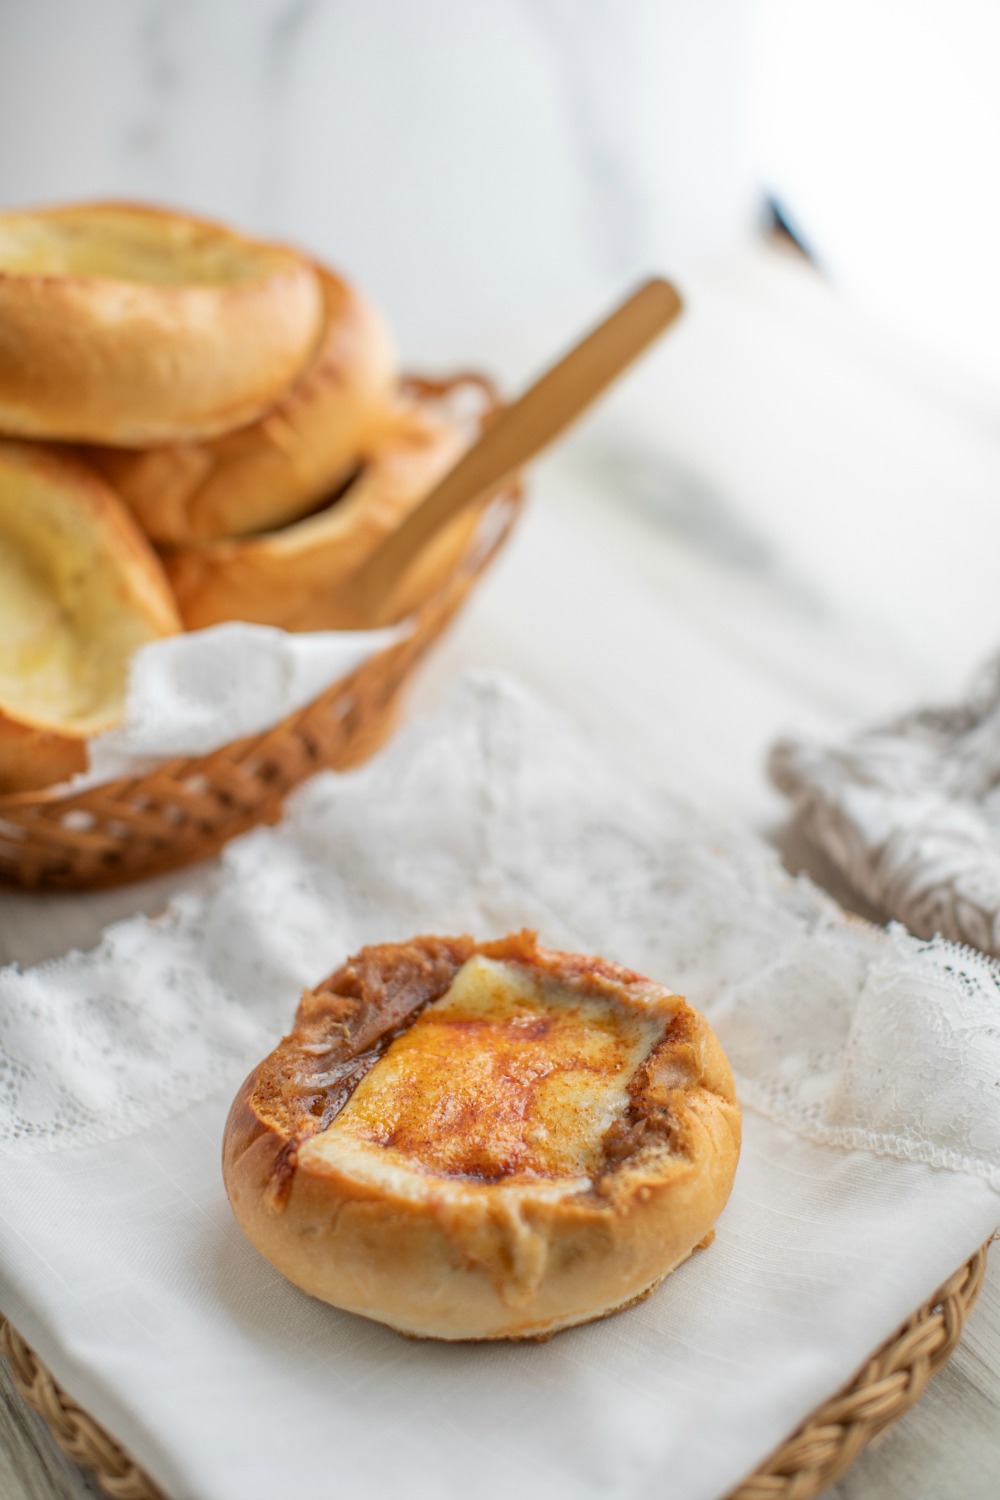 This is the most delicious french onion soup recipe in a bread bowl. French Onion Soup is the perfect comfort food on a cold winters night, everyone will know how much love you put into this meal. Caramelized onions, beef broth, melted gruyere cheese come together to form the most comforting, delicious bowl of French Onion Soup you will ever eat!